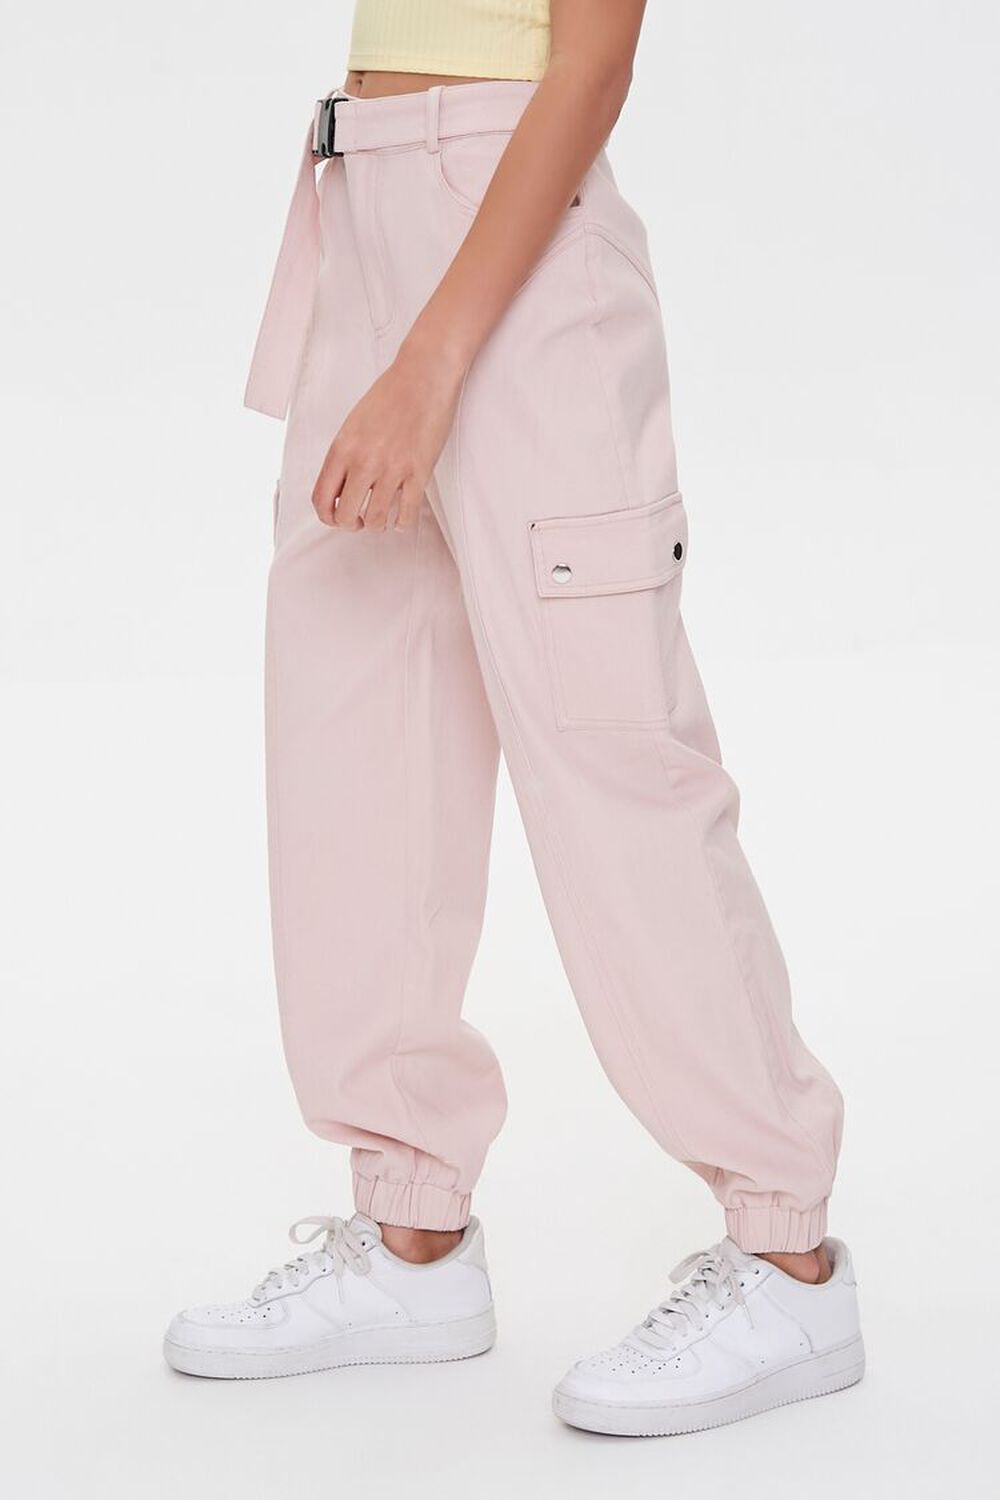 DUSTY PINK Belted Cargo Joggers, image 3